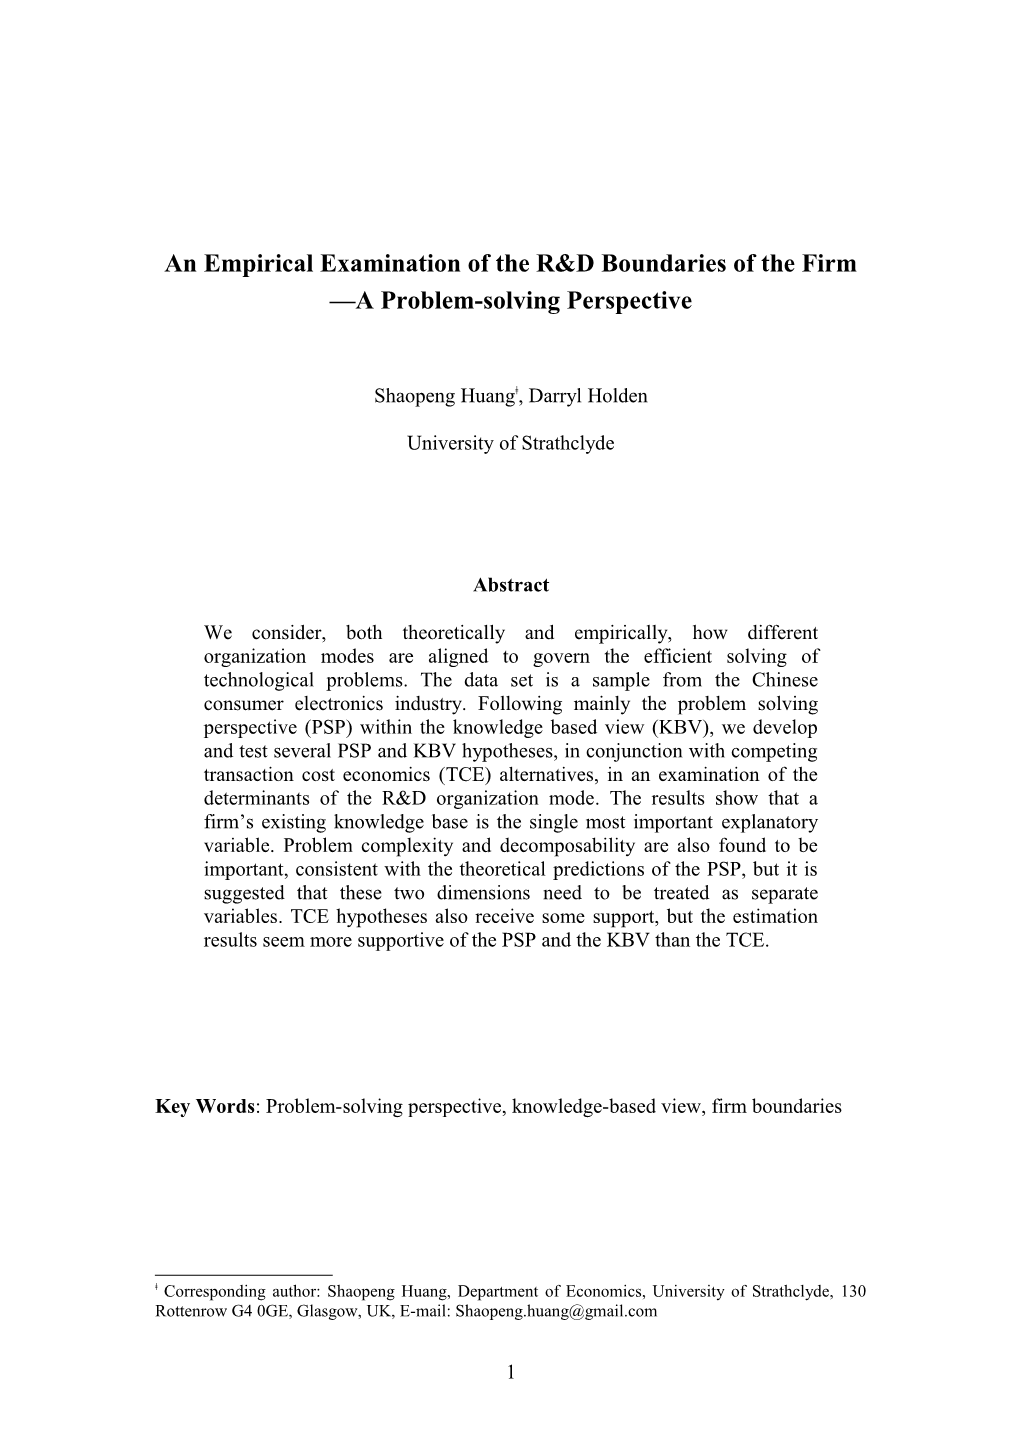 An Empirical Examination of the R&D Boundaries of the Firm a Problem-Solving Perspective